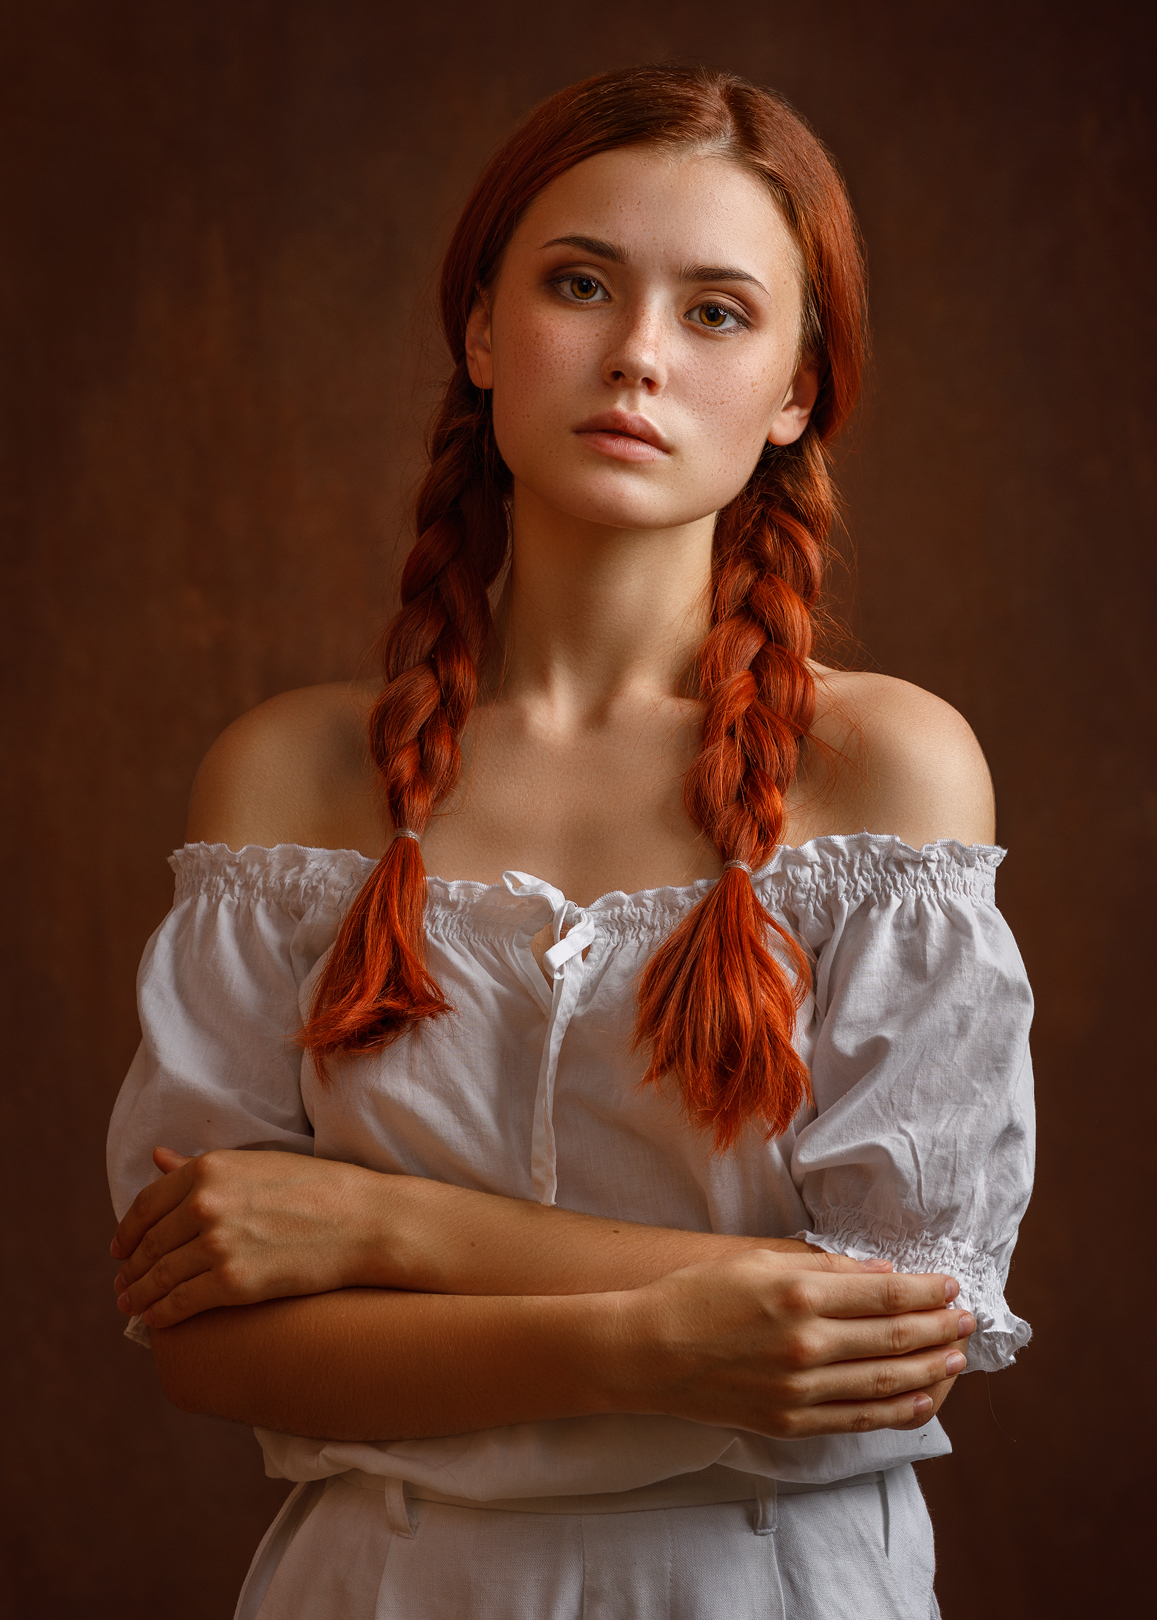 Sergey Sergeev Women Redhead Long Hair Twintails Braids French Braided Pigtails Bare Shoulders Arms  1157x1620